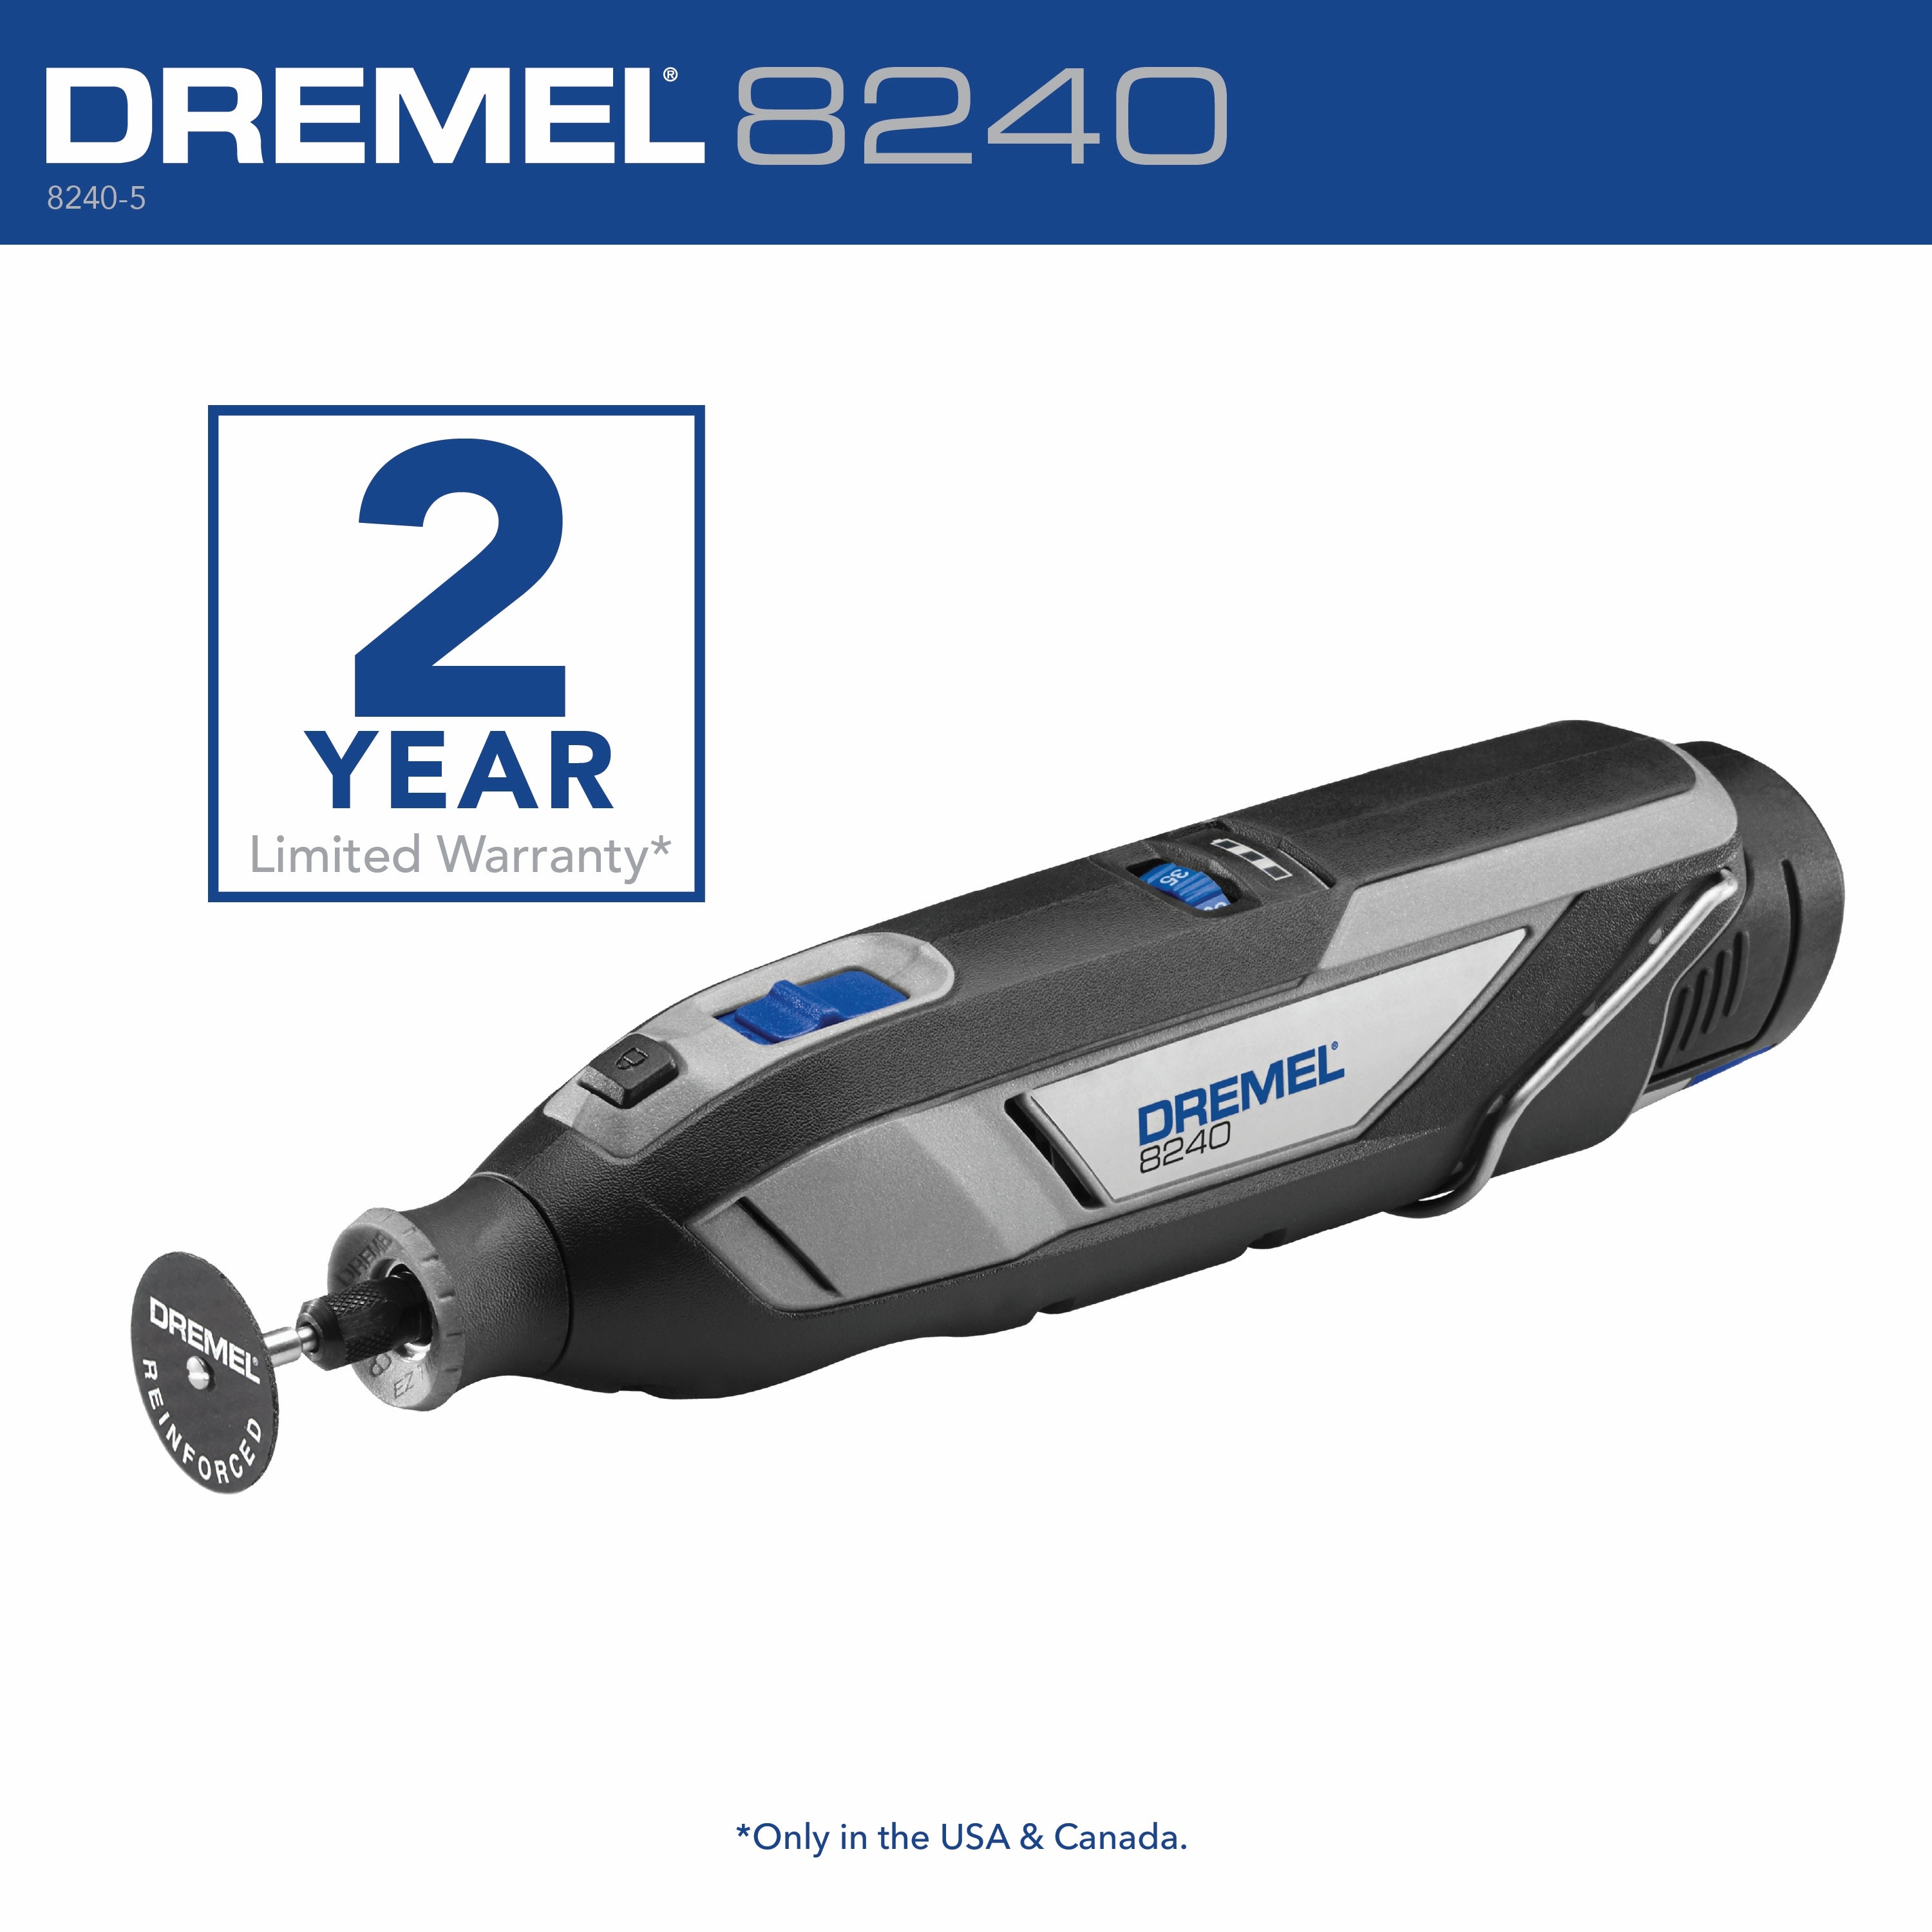 Dremel Rotary Tool Shaper/Router Table to Sand, Edge, Groove, and Slot Wood  231 - The Home Depot